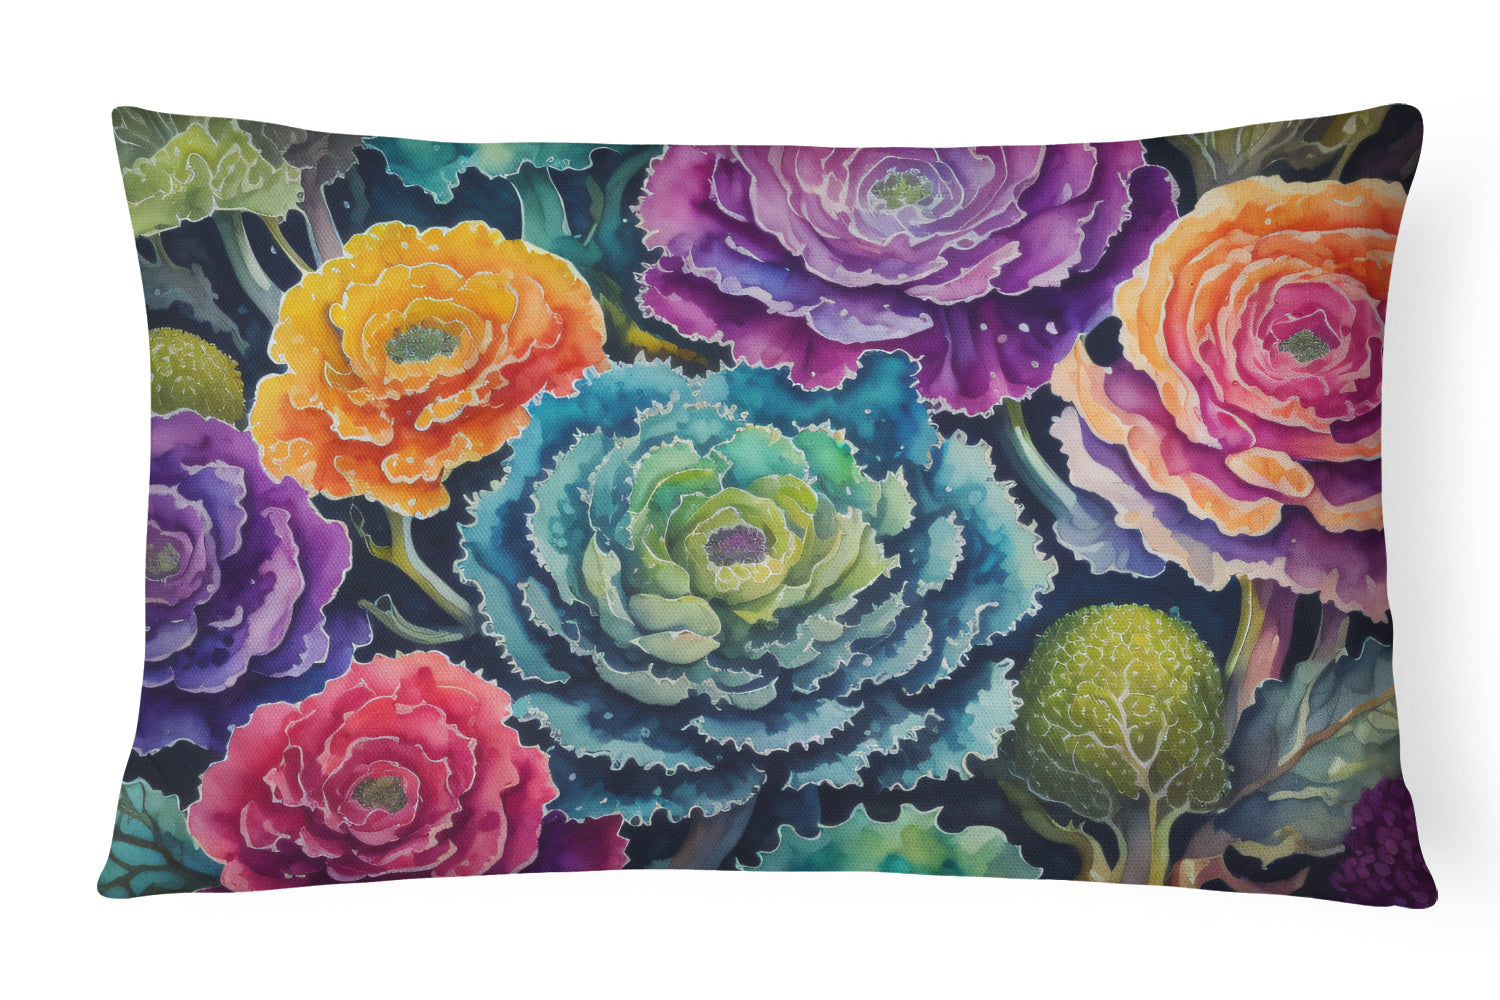 Buy this Ornamental Kale in Color Fabric Decorative Pillow